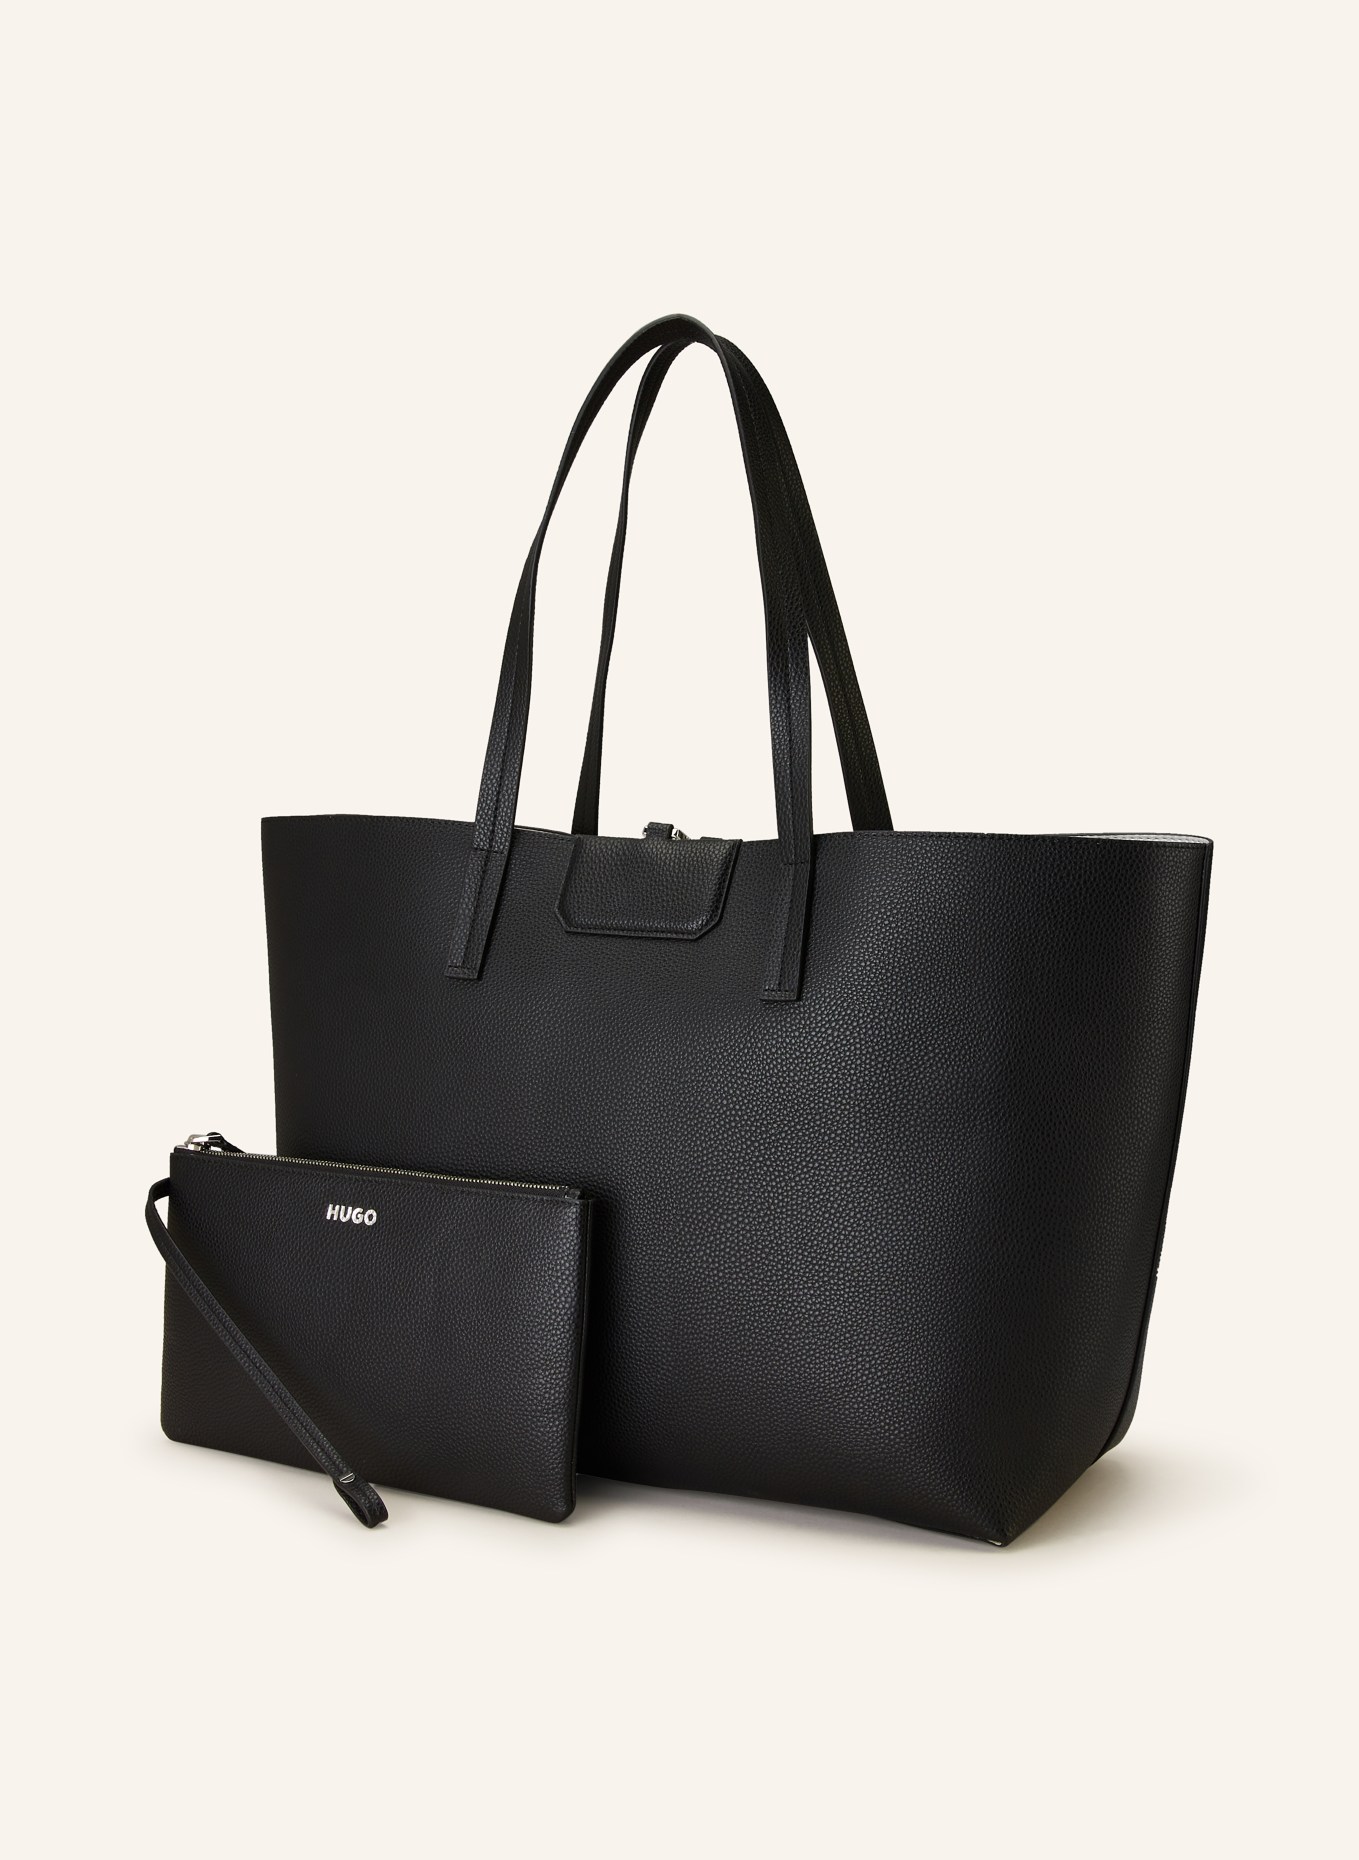 HUGO Shopper black with CHRIS pouch in